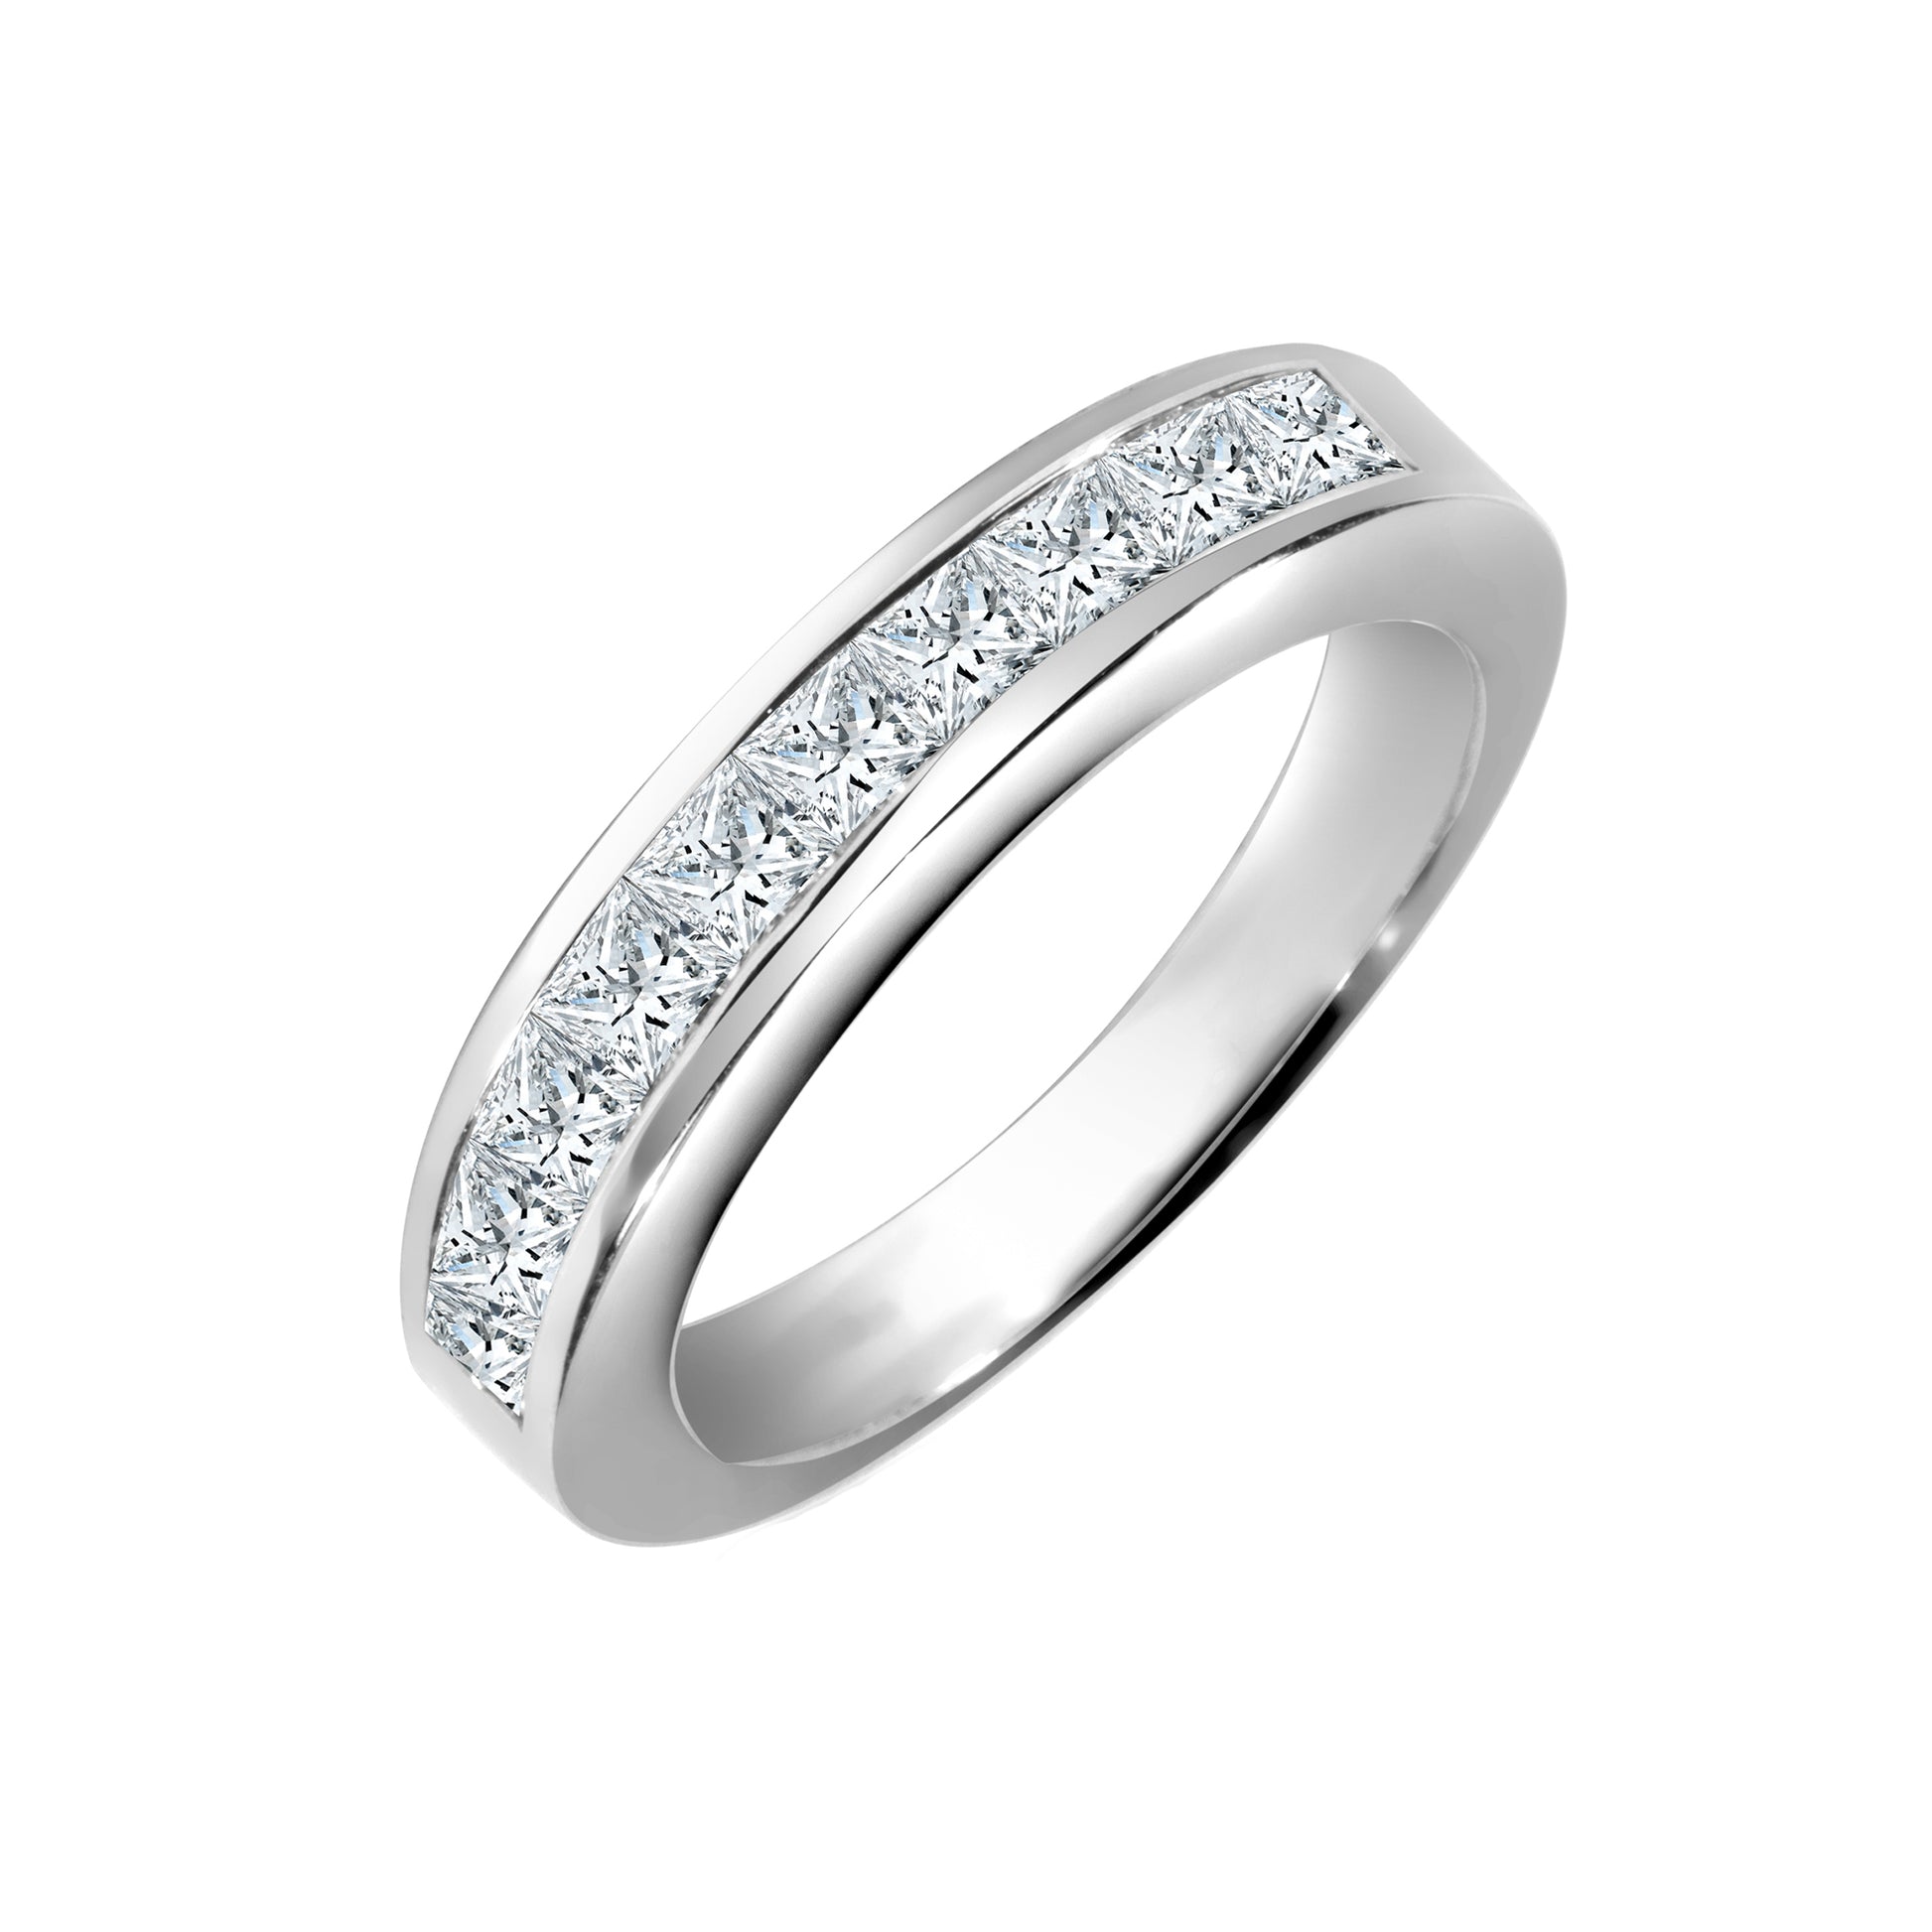 18ct White Gold  0.5ct Diamond Dainty Band Eternity Ring 3.5mm - 18R188-050